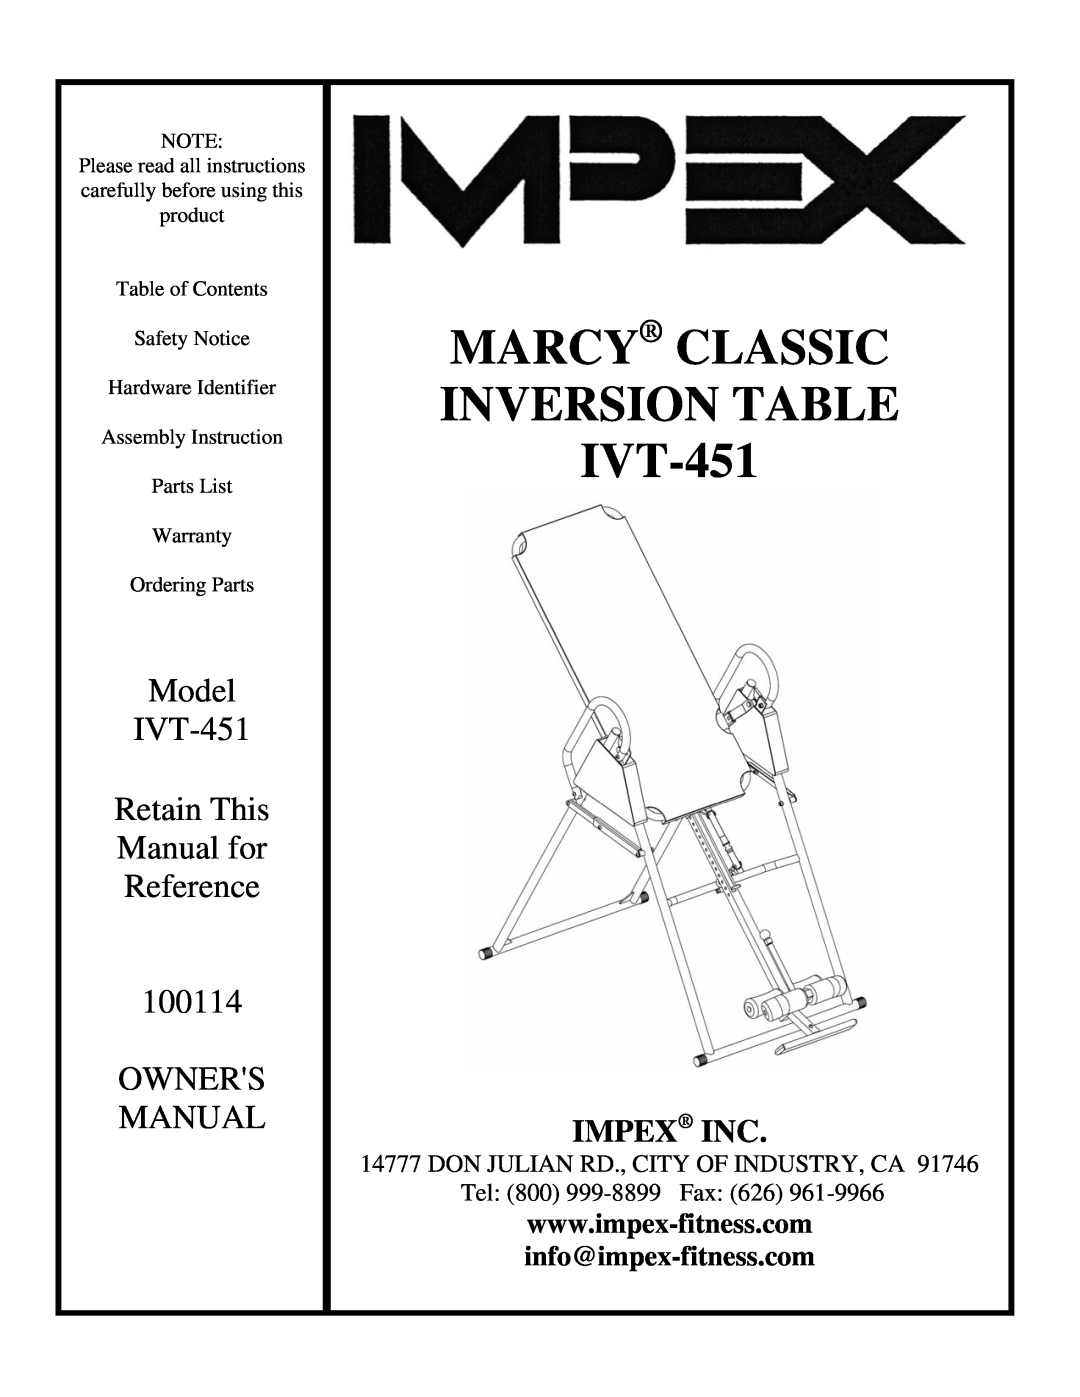 Impex manual MARCY CLASSIC INVERSION TABLE IVT-451, Model IVT-451 Retain This Manual for Reference 100114 OWNERS MANUAL 